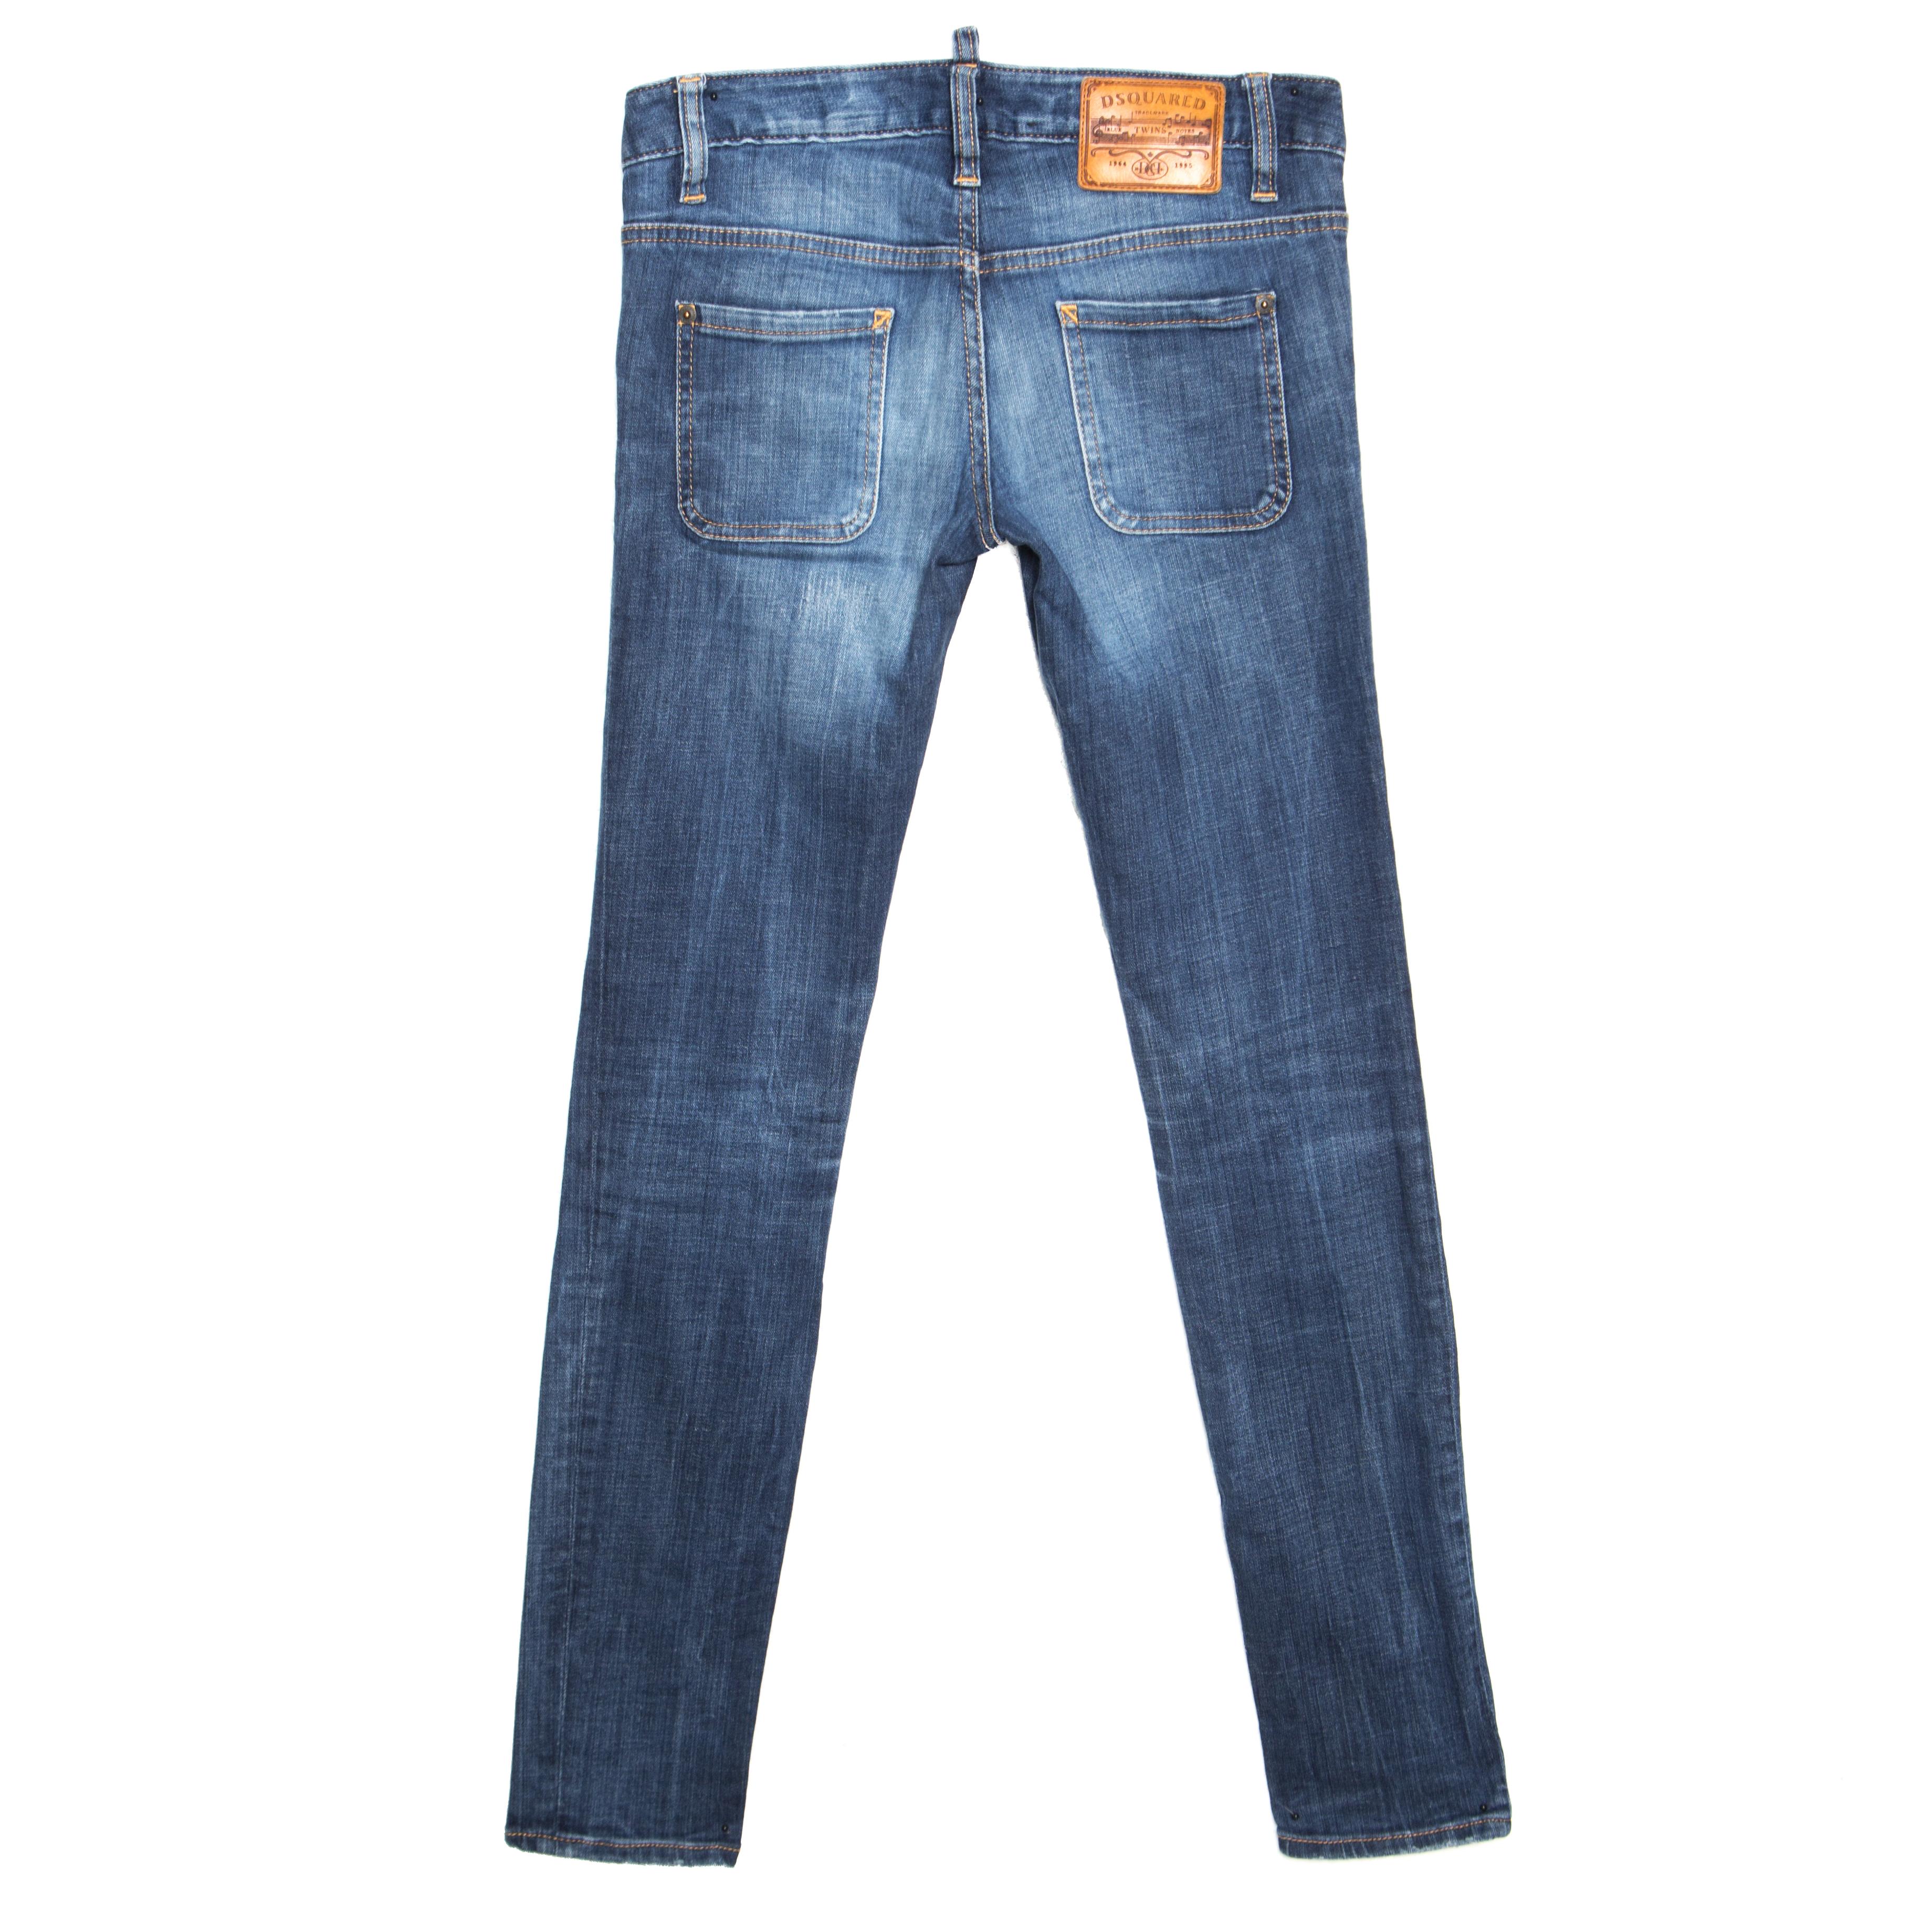 Made from cotton, these jeans from Dsquared2 will be a perfect addition to your jeans collection. They carry a slim-fit silhouette with button fastening on the front and distressed effects. This creation is a buy you won't regret.

